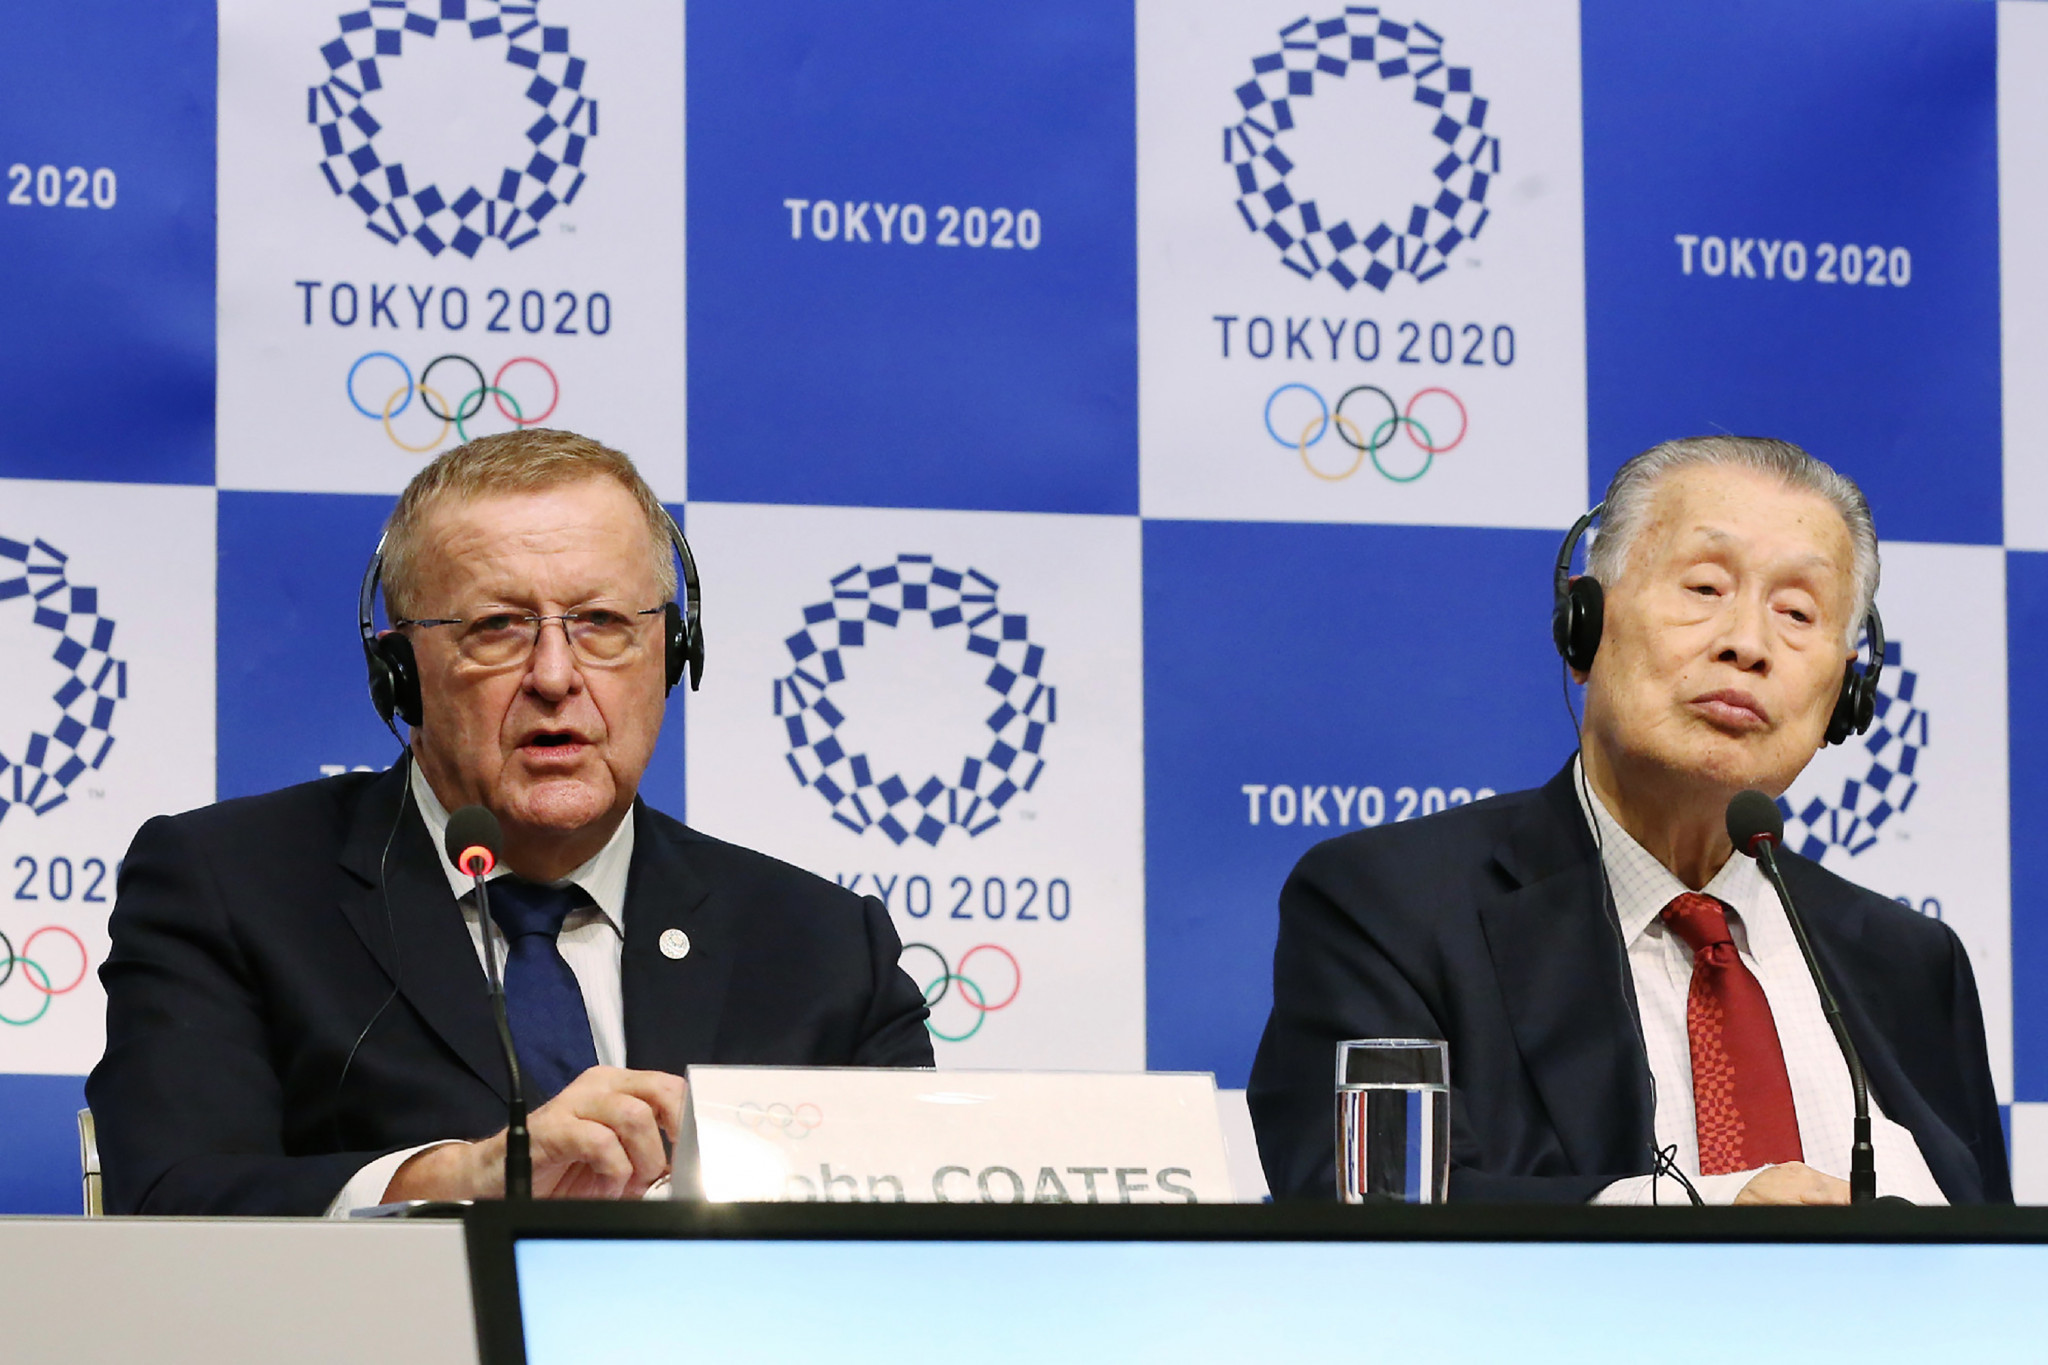 Coates claims freeze in planning of boxing tournament will not have negative impact on Tokyo 2020